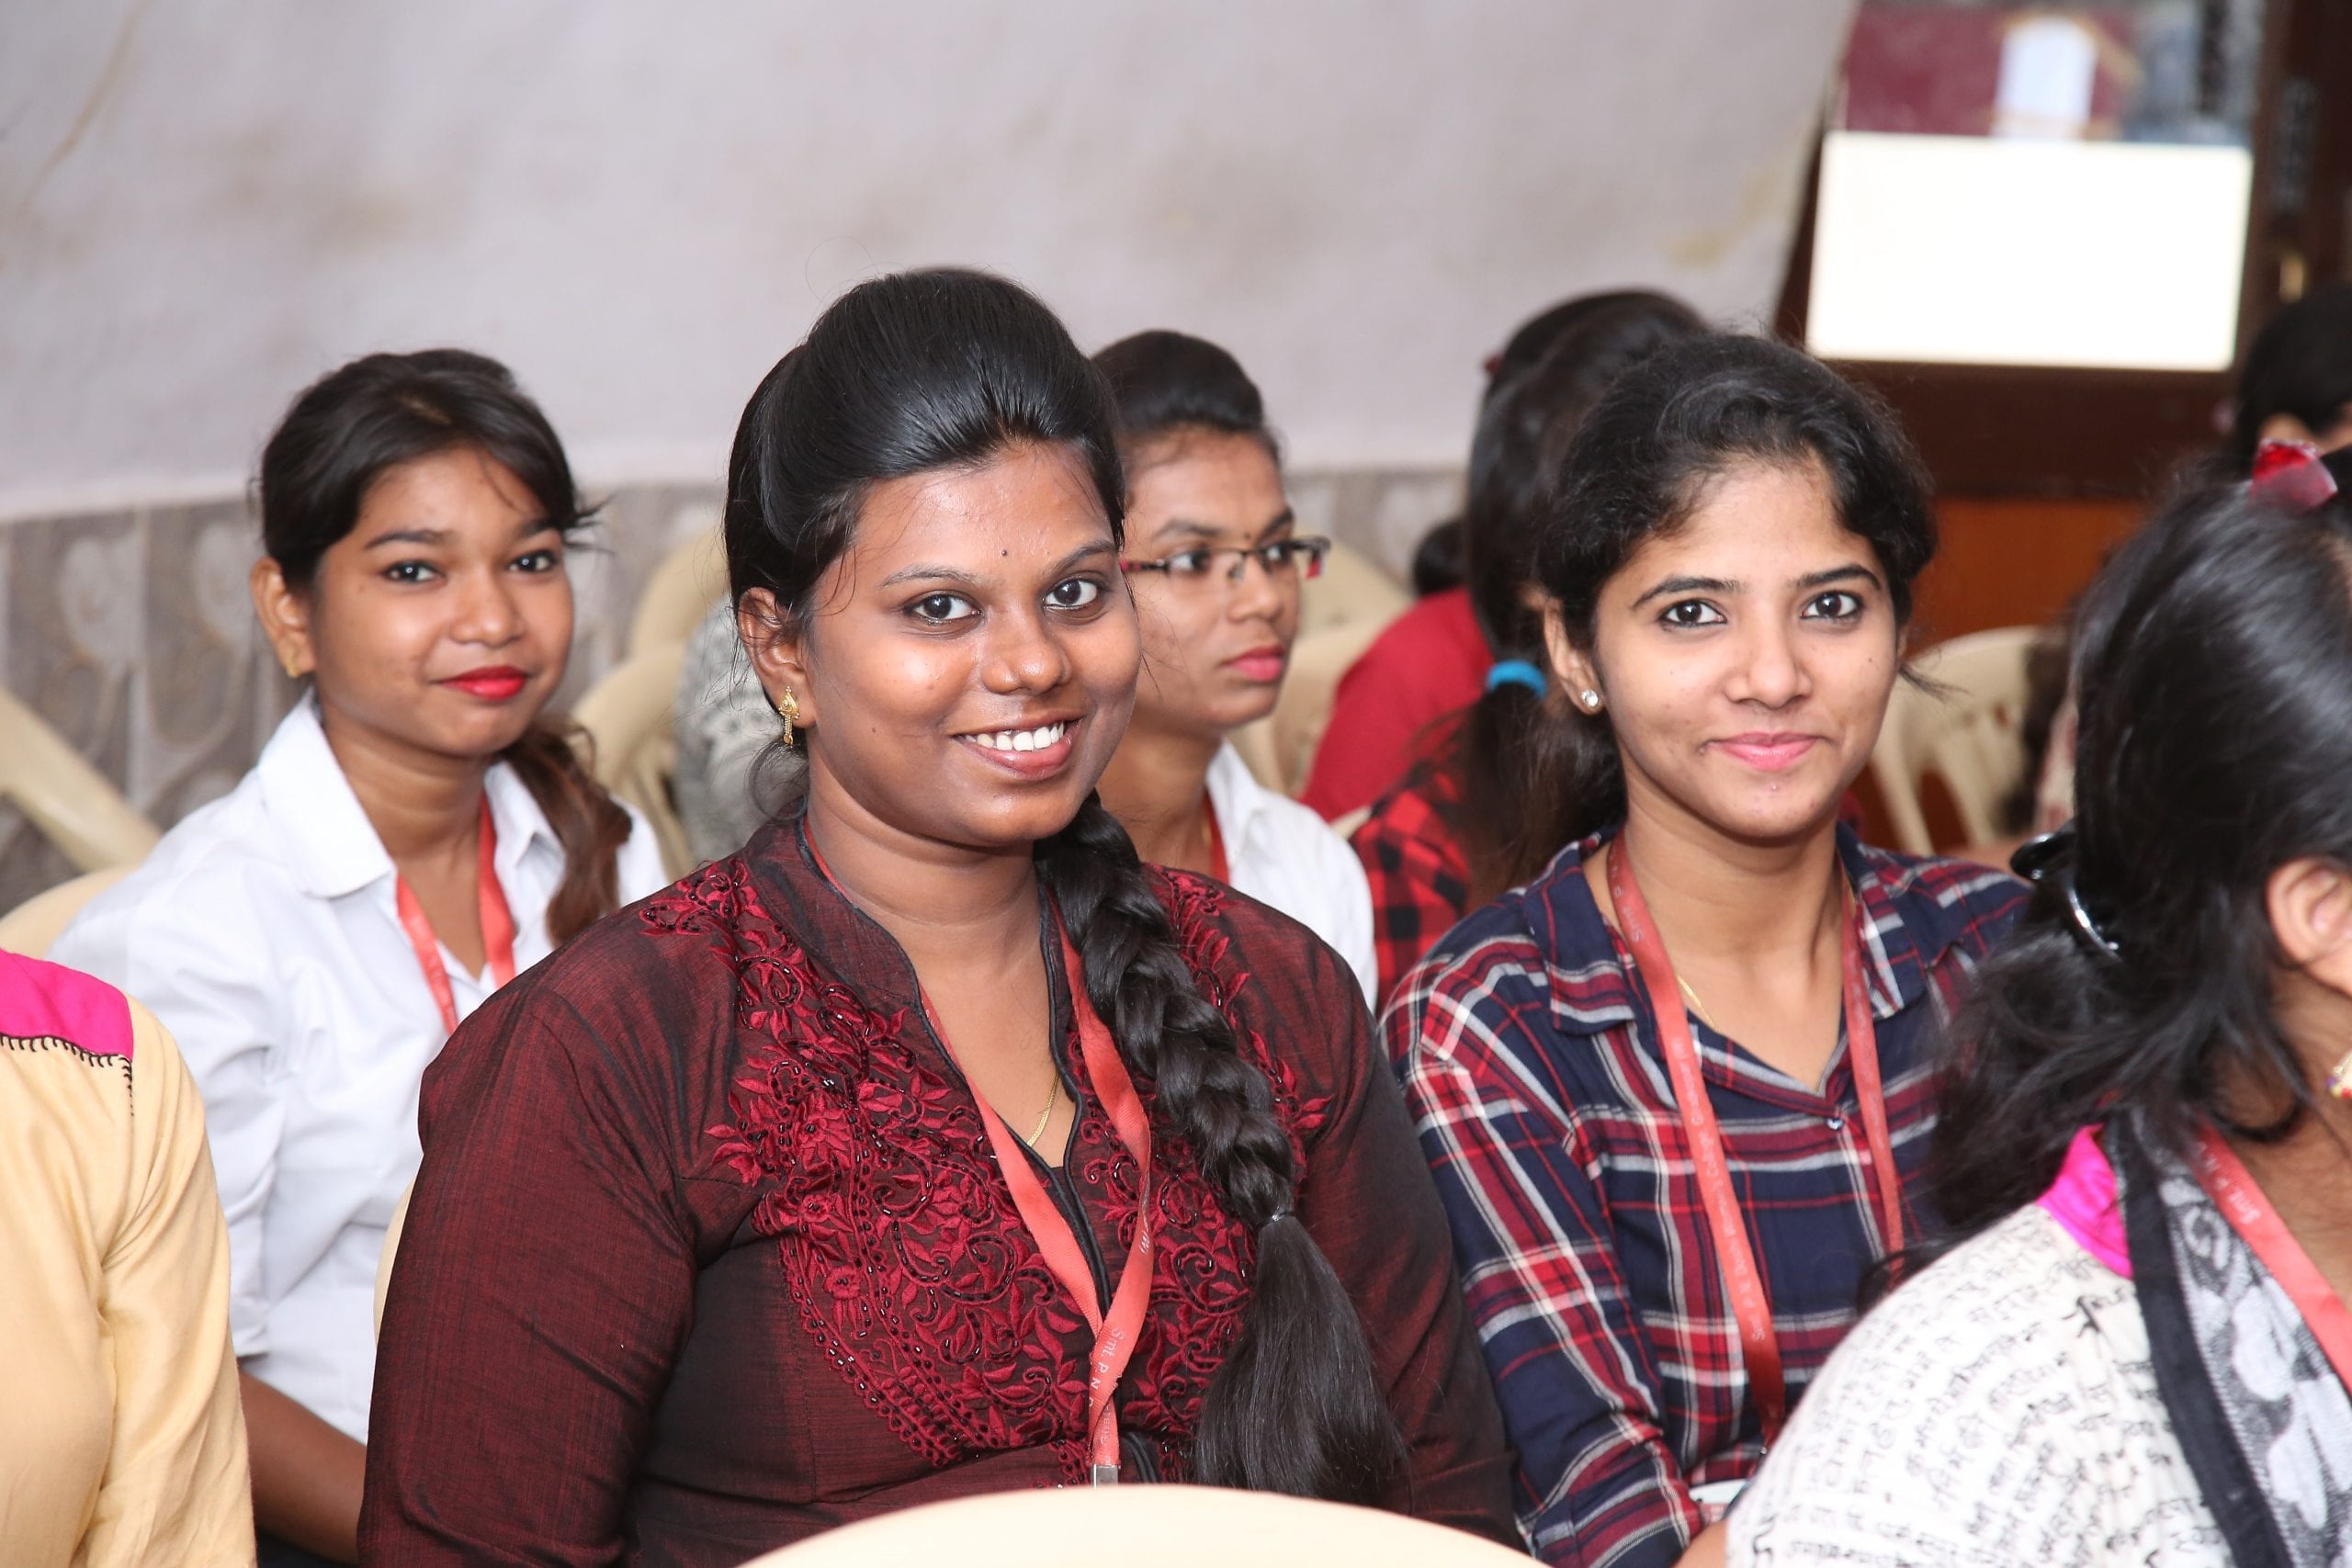 A group of young women learn about formal work opportunities at a workshop in India